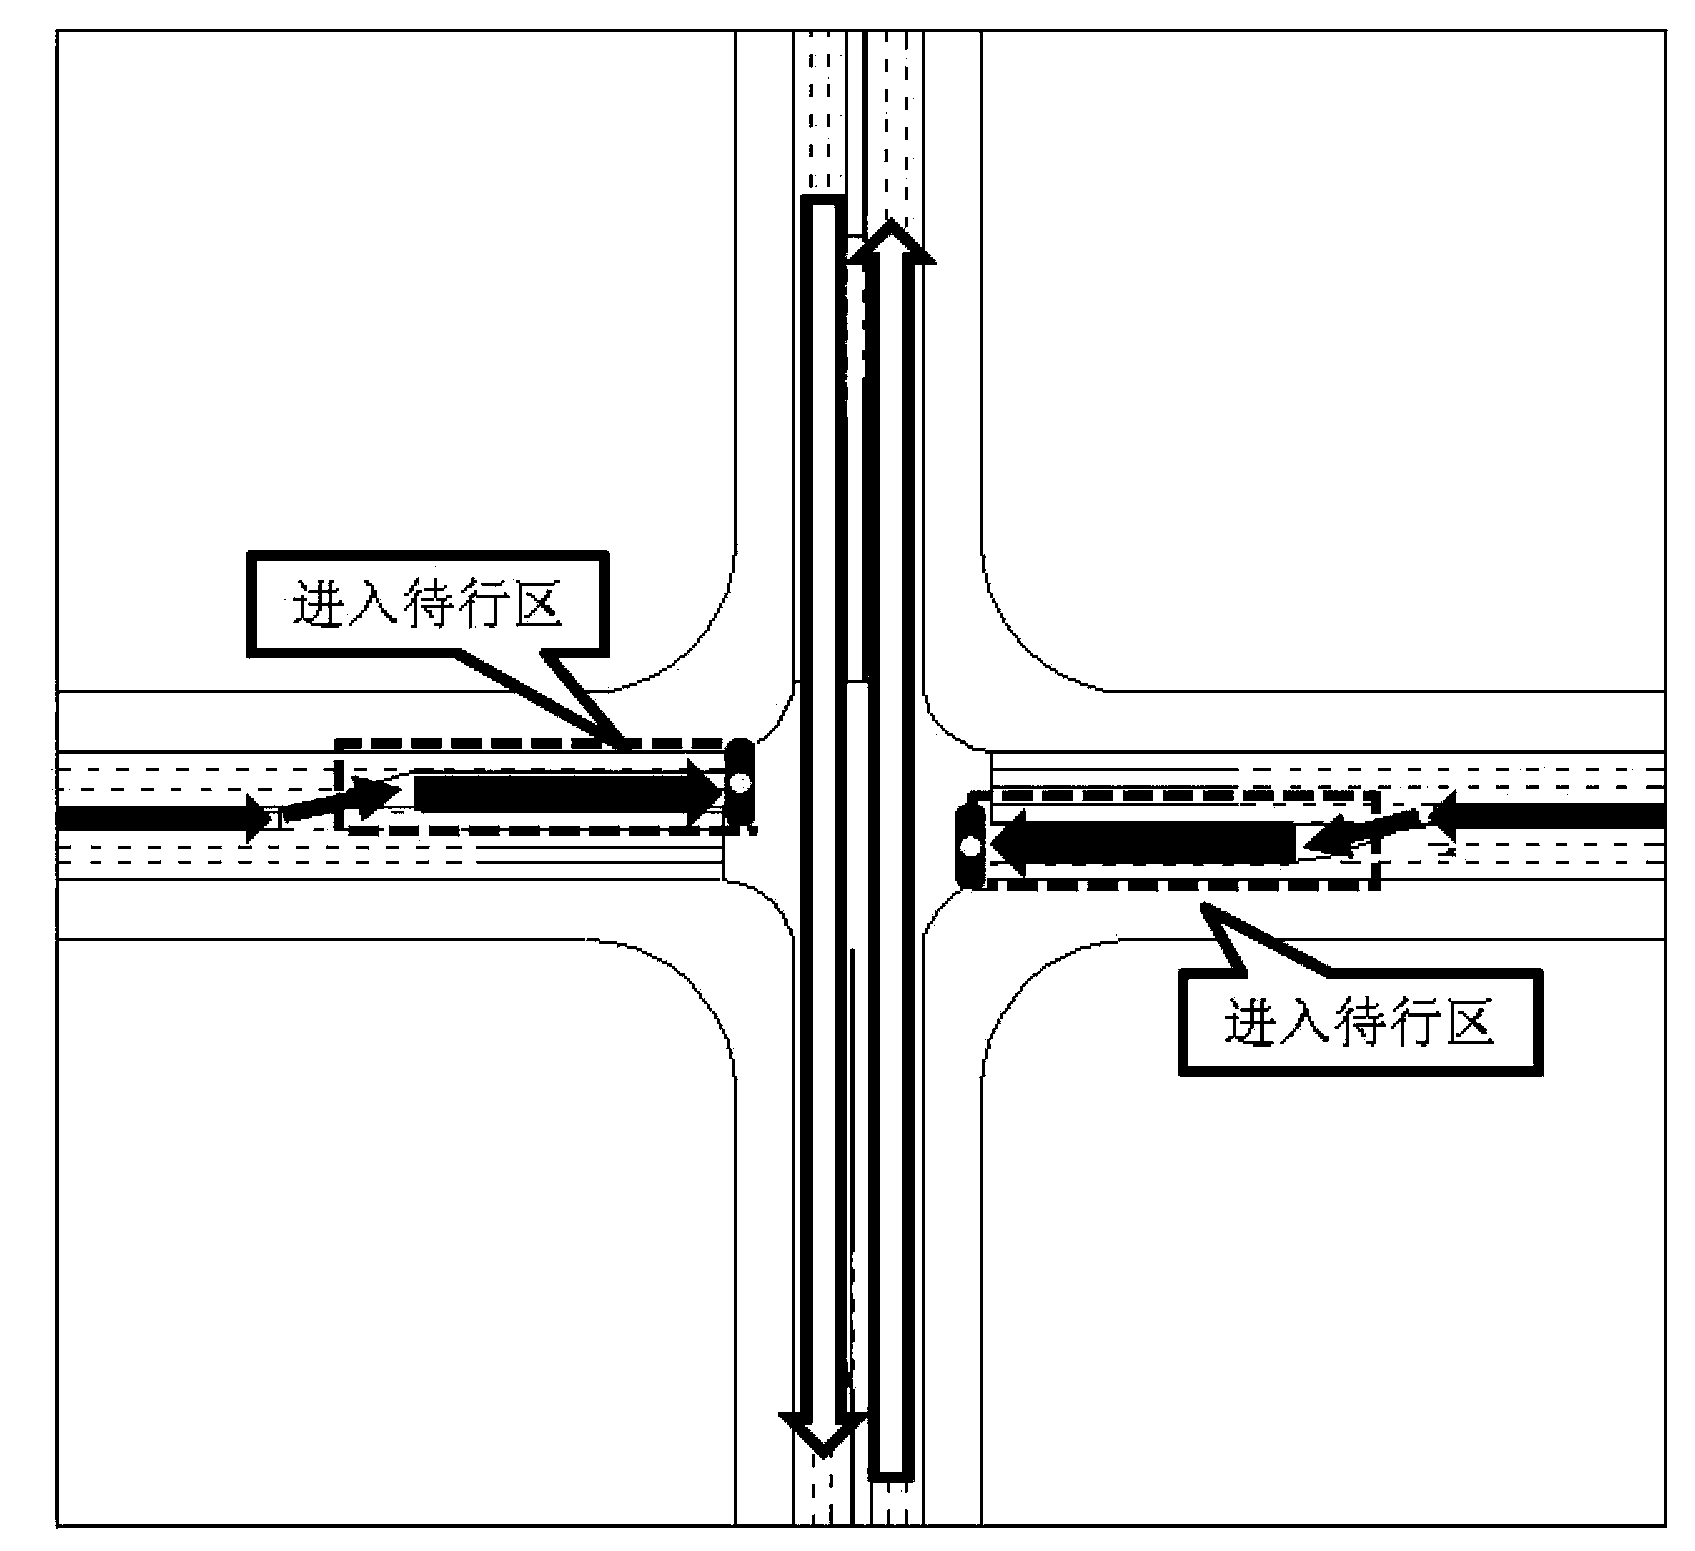 Variable-expansion intersection lane